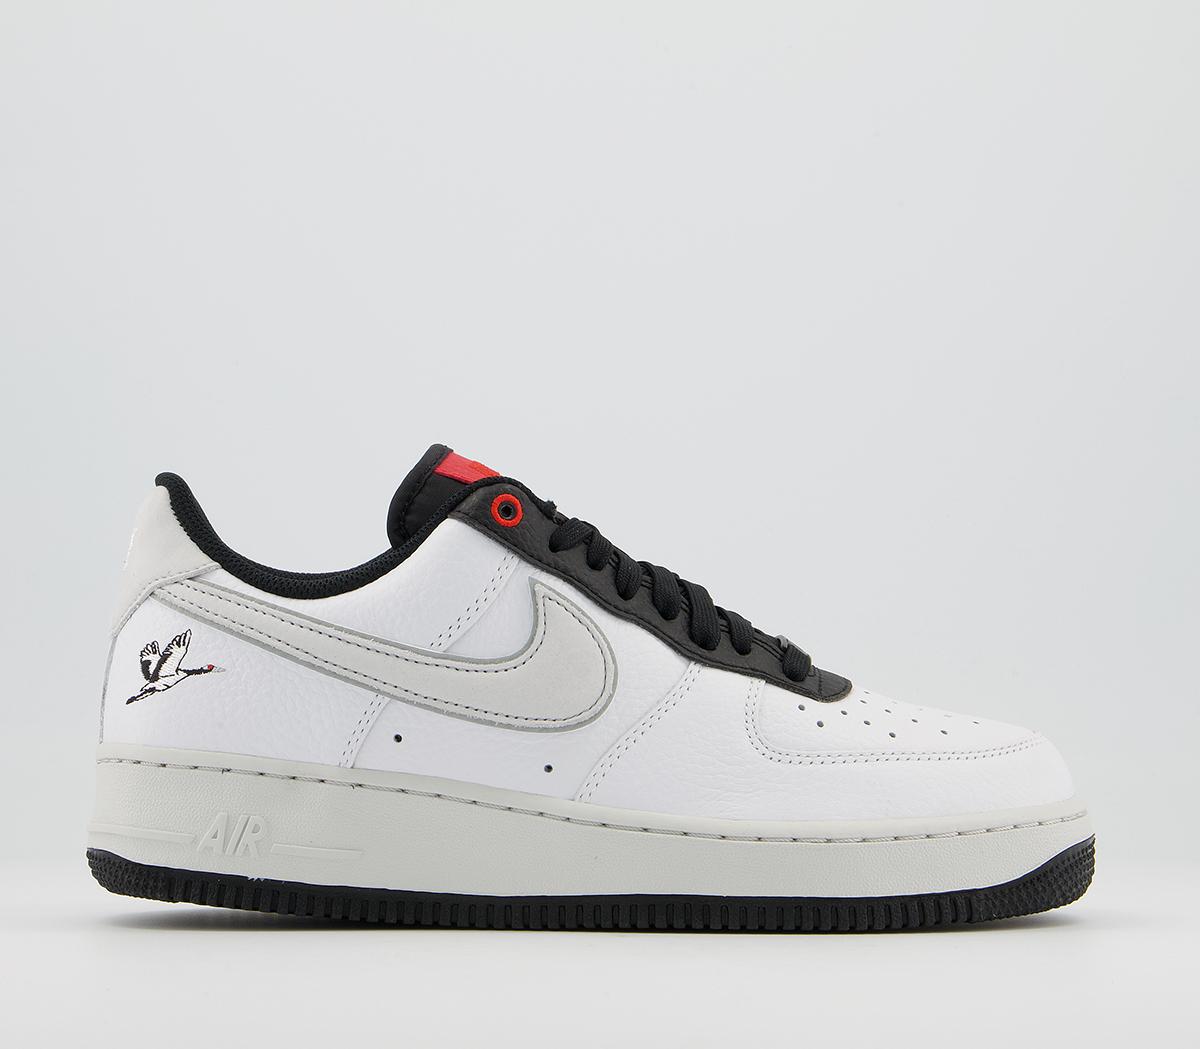 NikeAir Force 1 07 TrainersLx White Photon Dust Black Chile Red